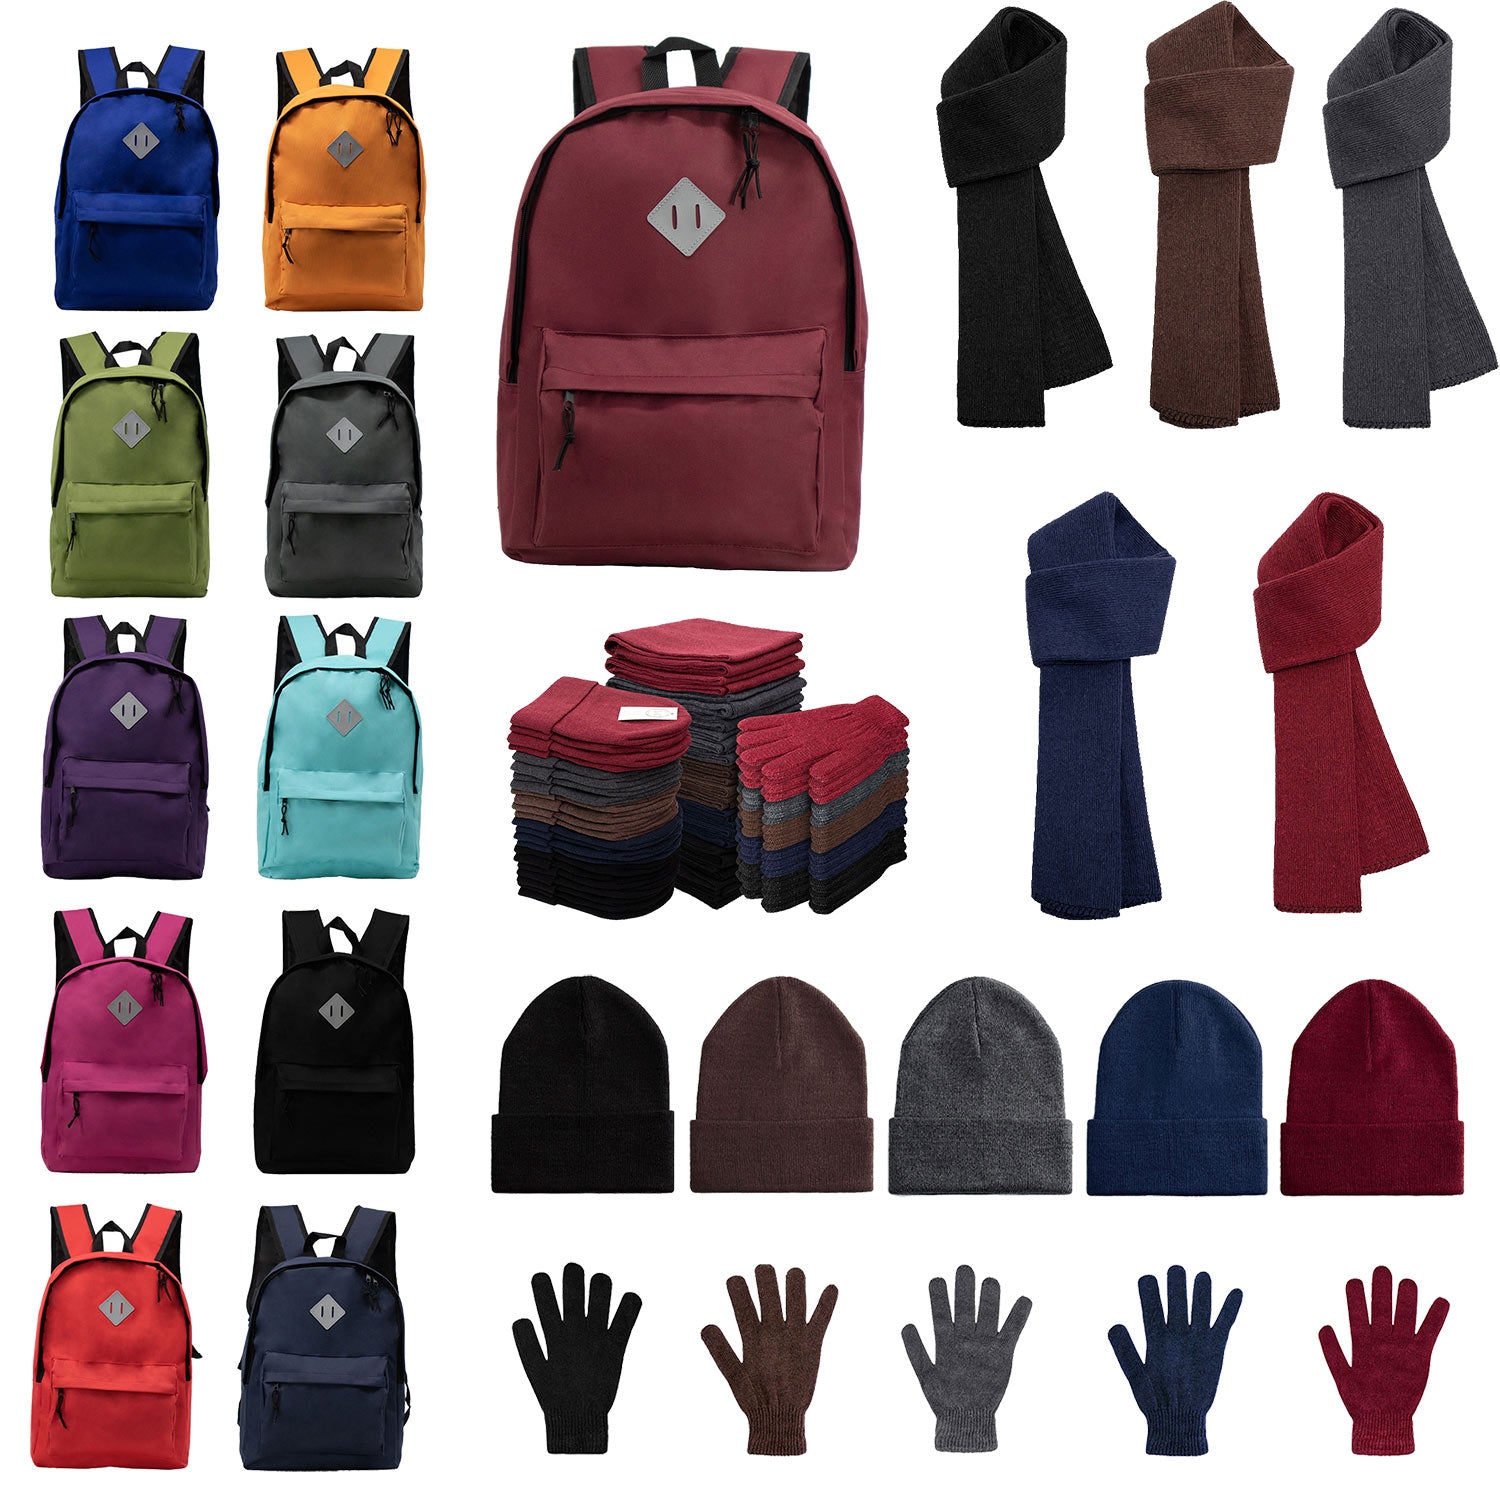 Bulk Case of 12 Backpacks and 12 Winter Item Sets - Wholesale Care Package - Emergencies, Homeless, Charity